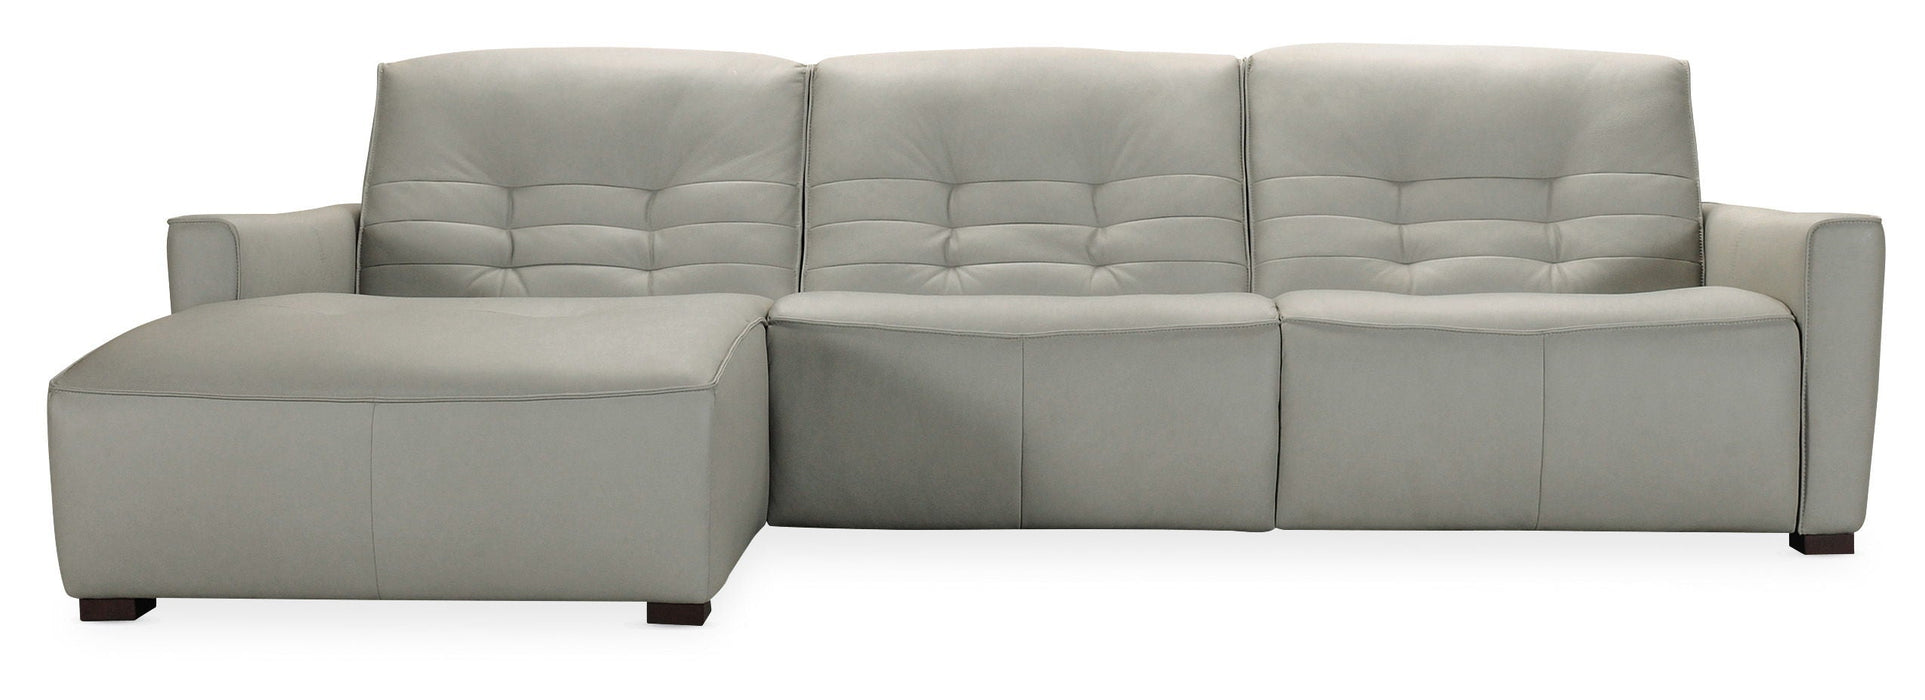 Reaux Power Motion Sofa With LAF Chaise With 2 Power Recliners